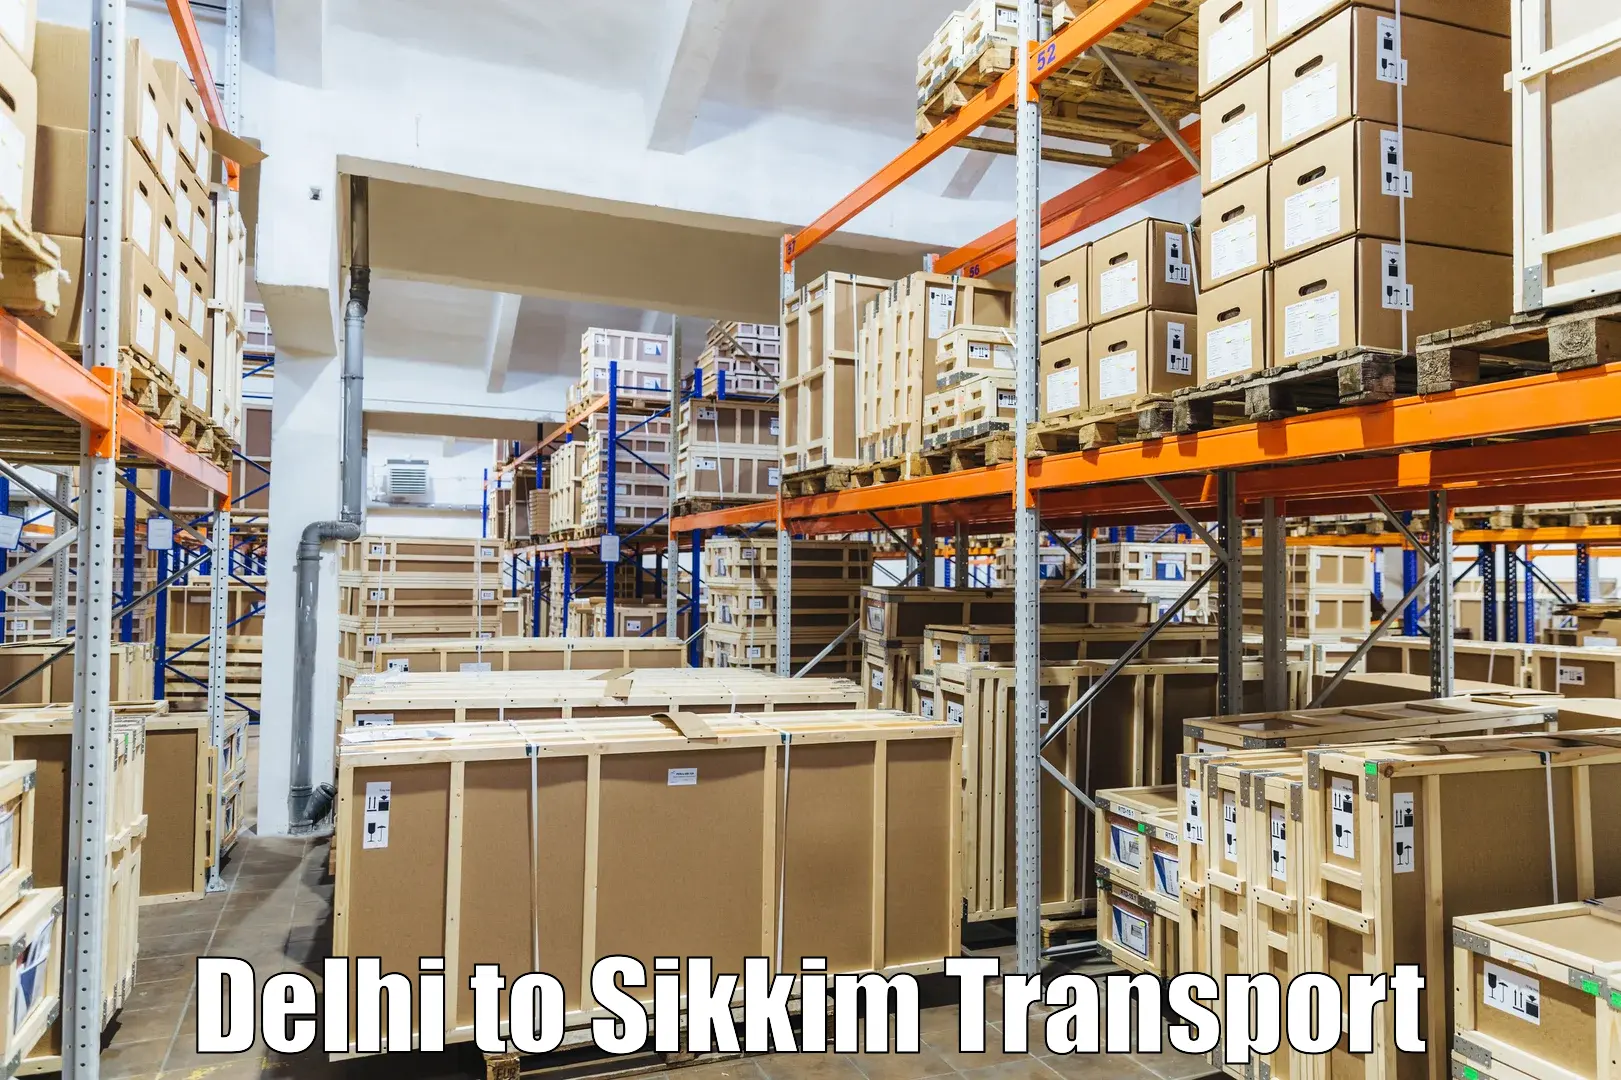 Daily transport service in Delhi to Sikkim